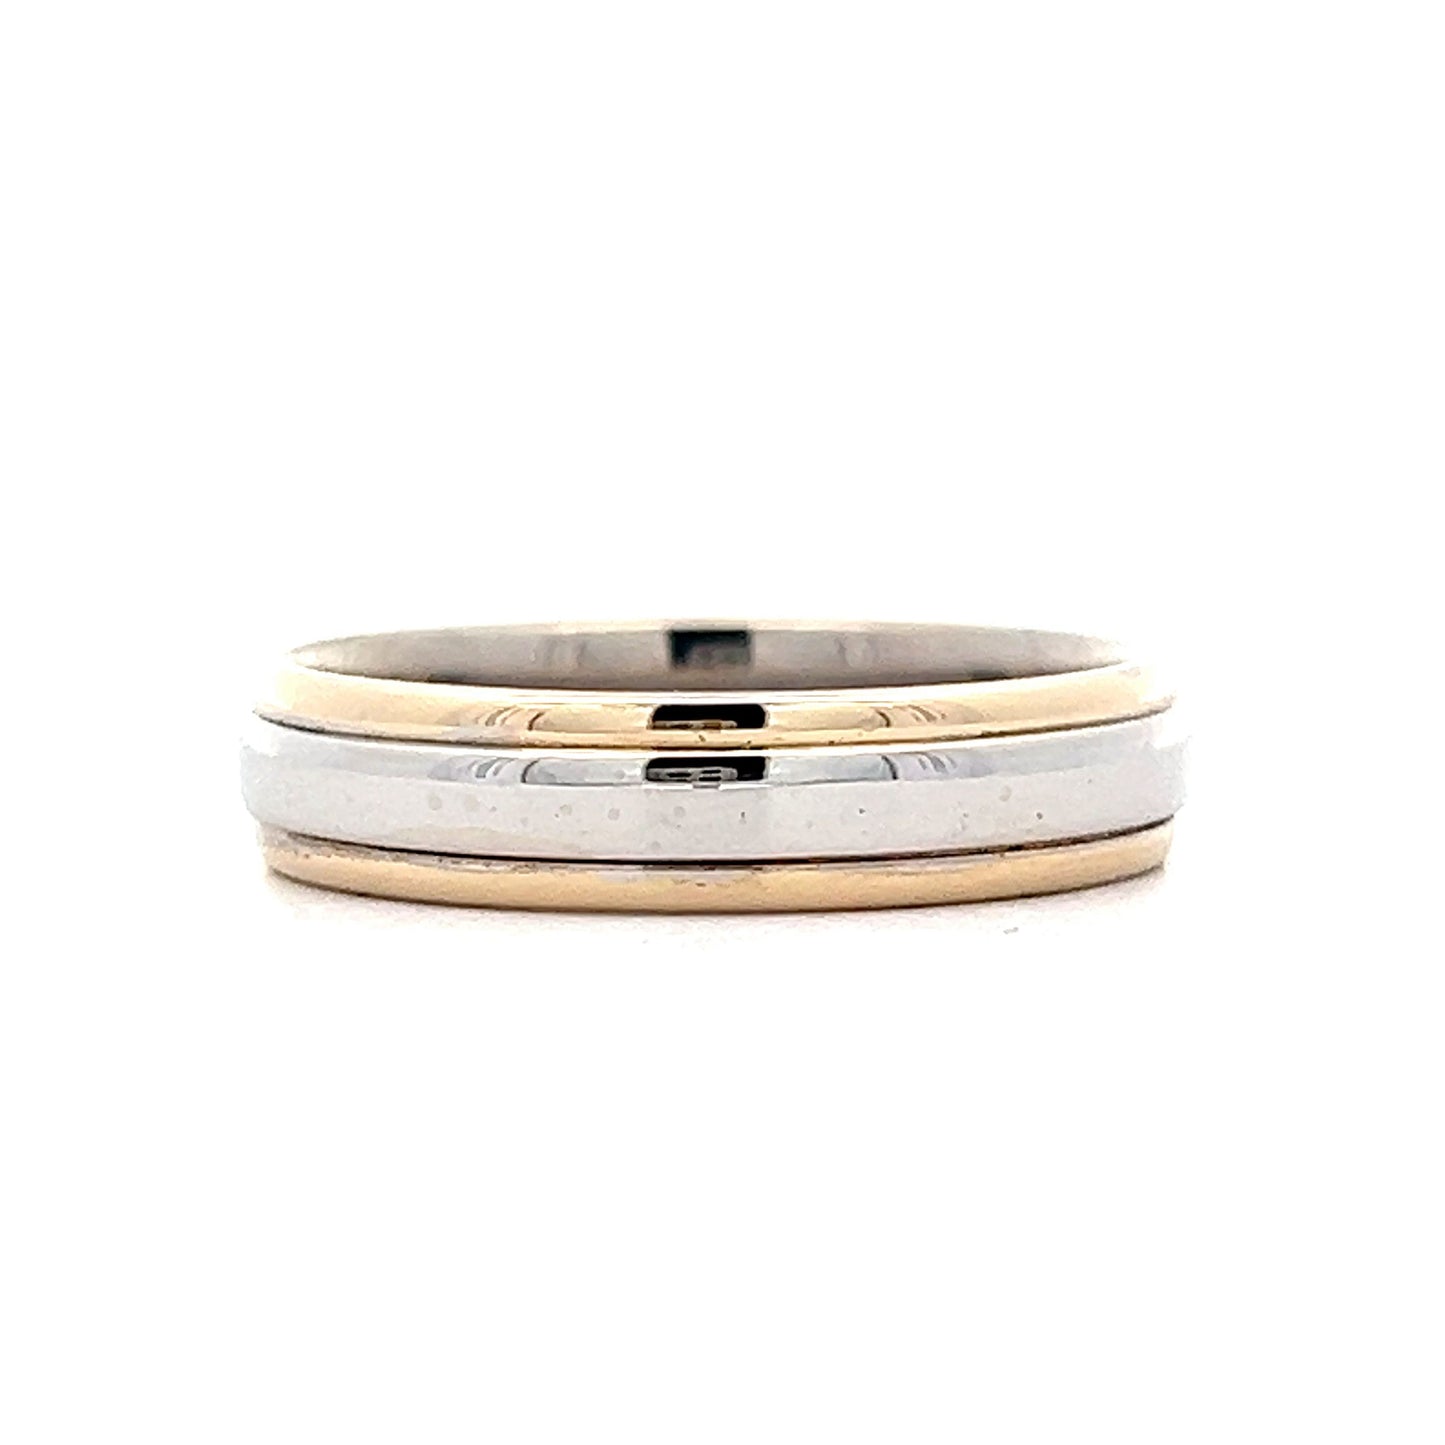 Men's Two-Toned Wedding Band in 14k White & Yellow Gold